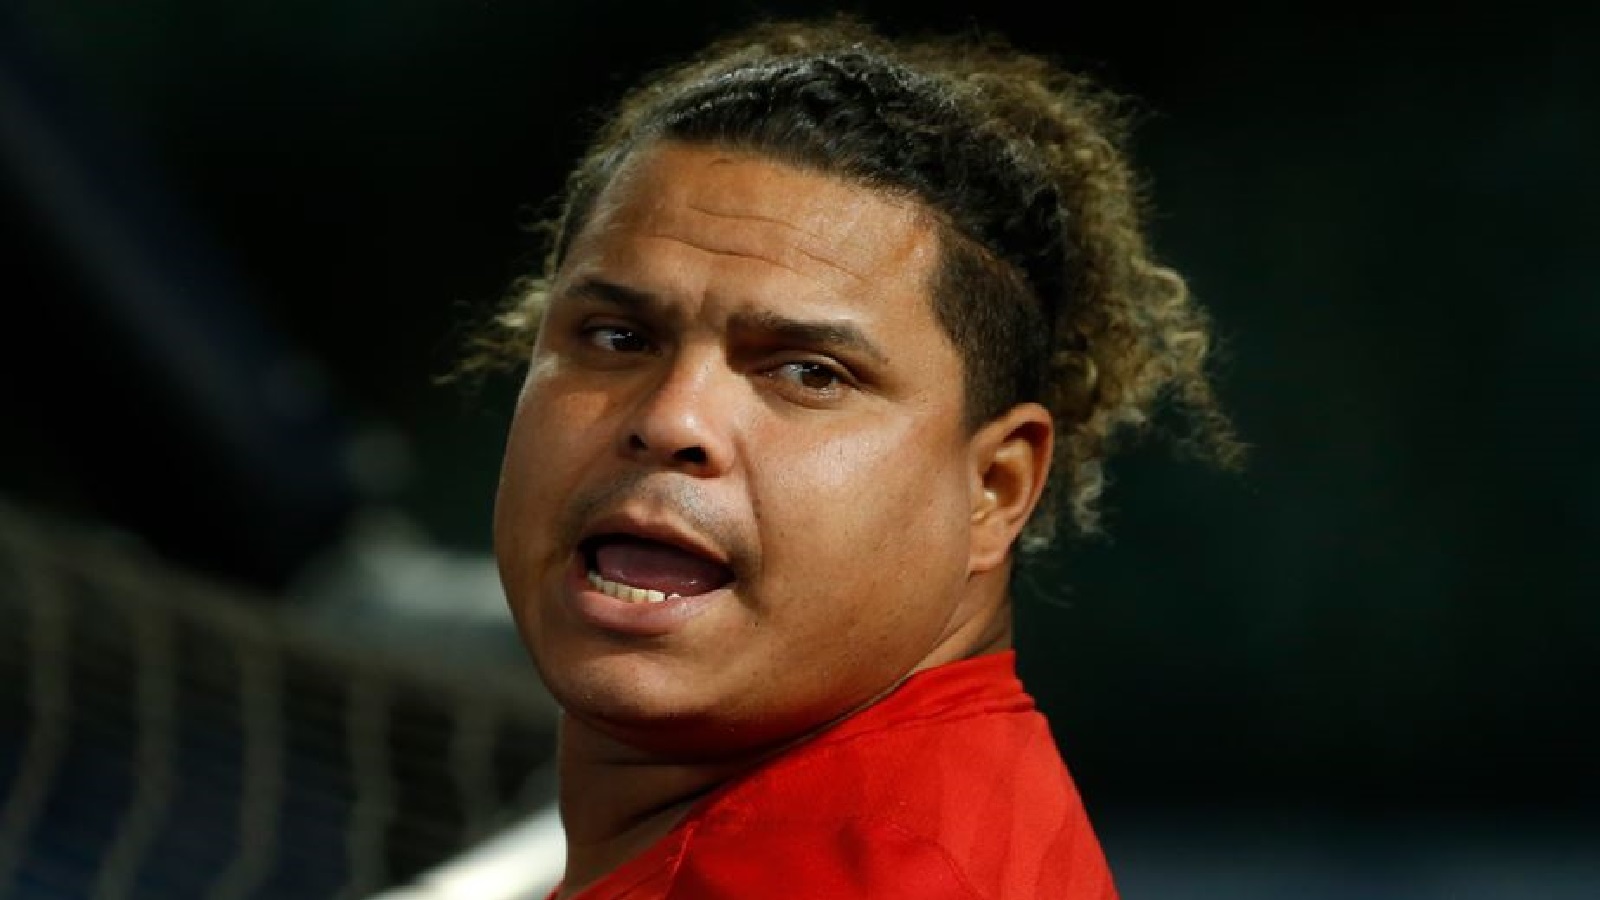 MLB fan favorite Willians Astudillo lands contract with Japanese